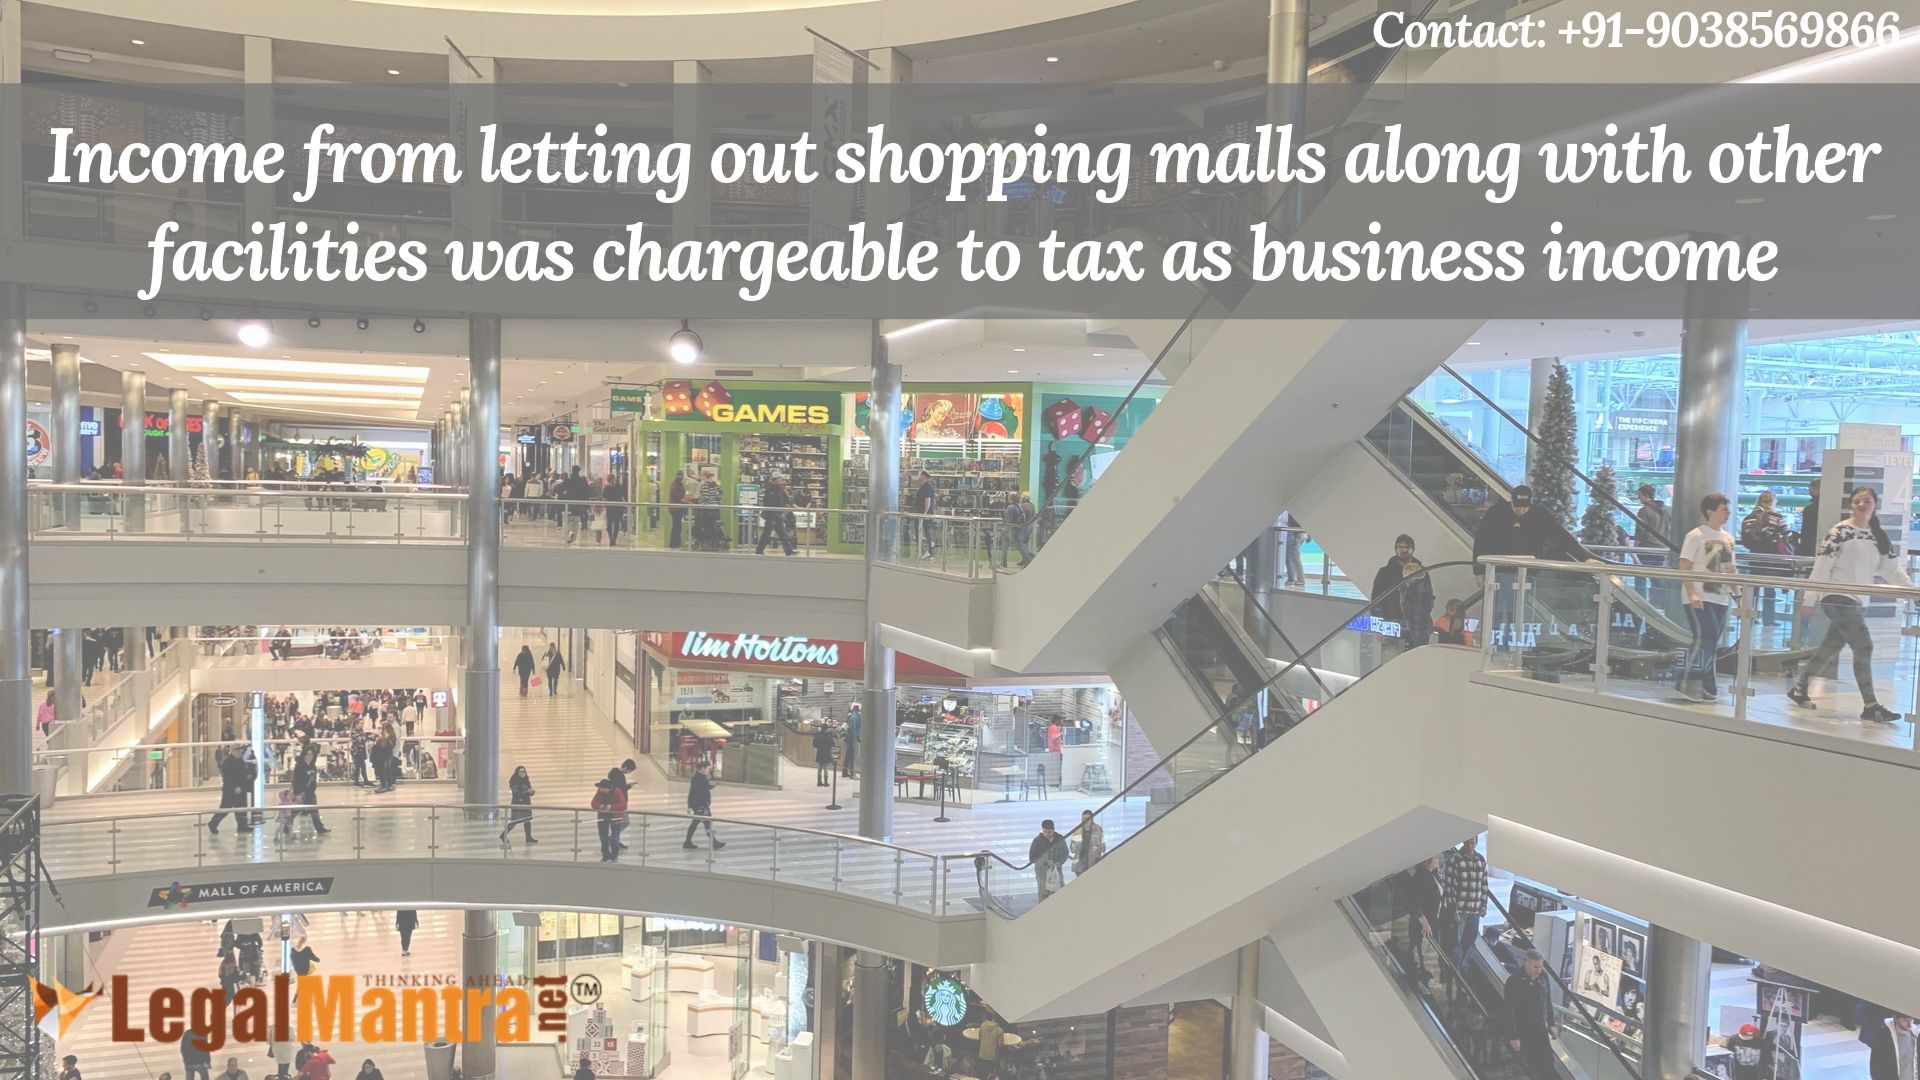 Income from letting out shopping malls along with other facilities was chargeable to tax as business income